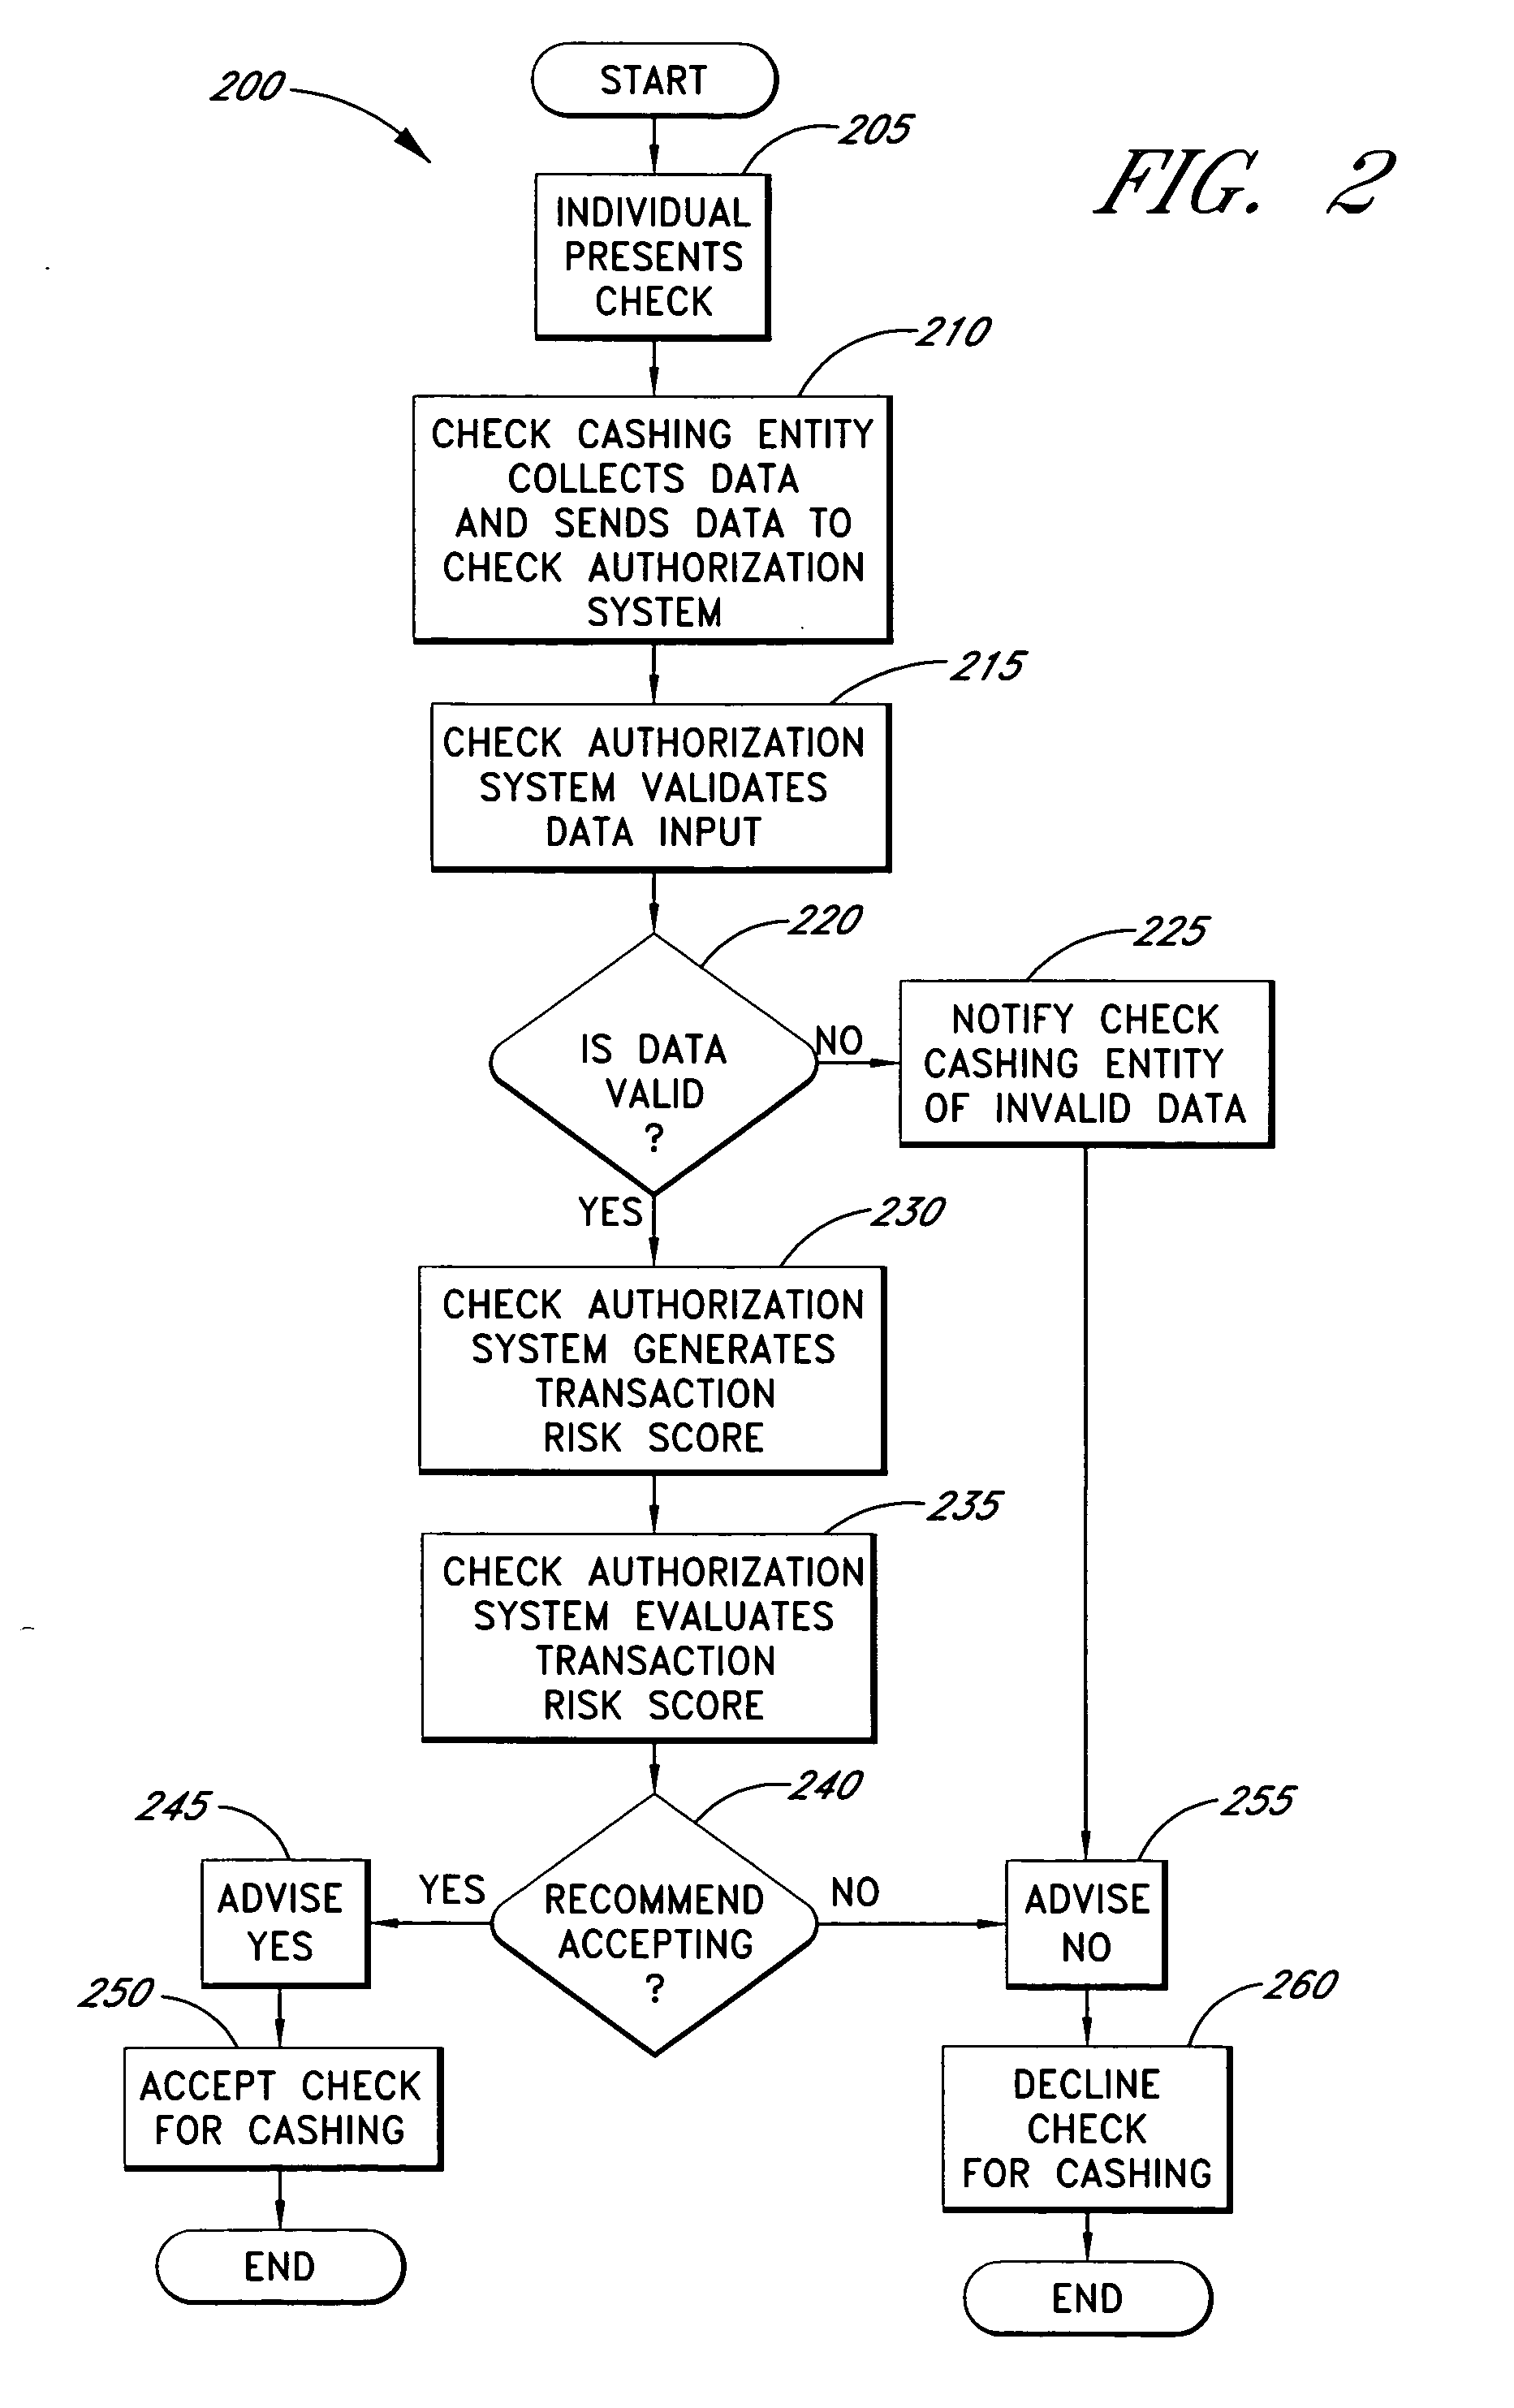 Systems and methods for obtaining biometric information at a point of sale